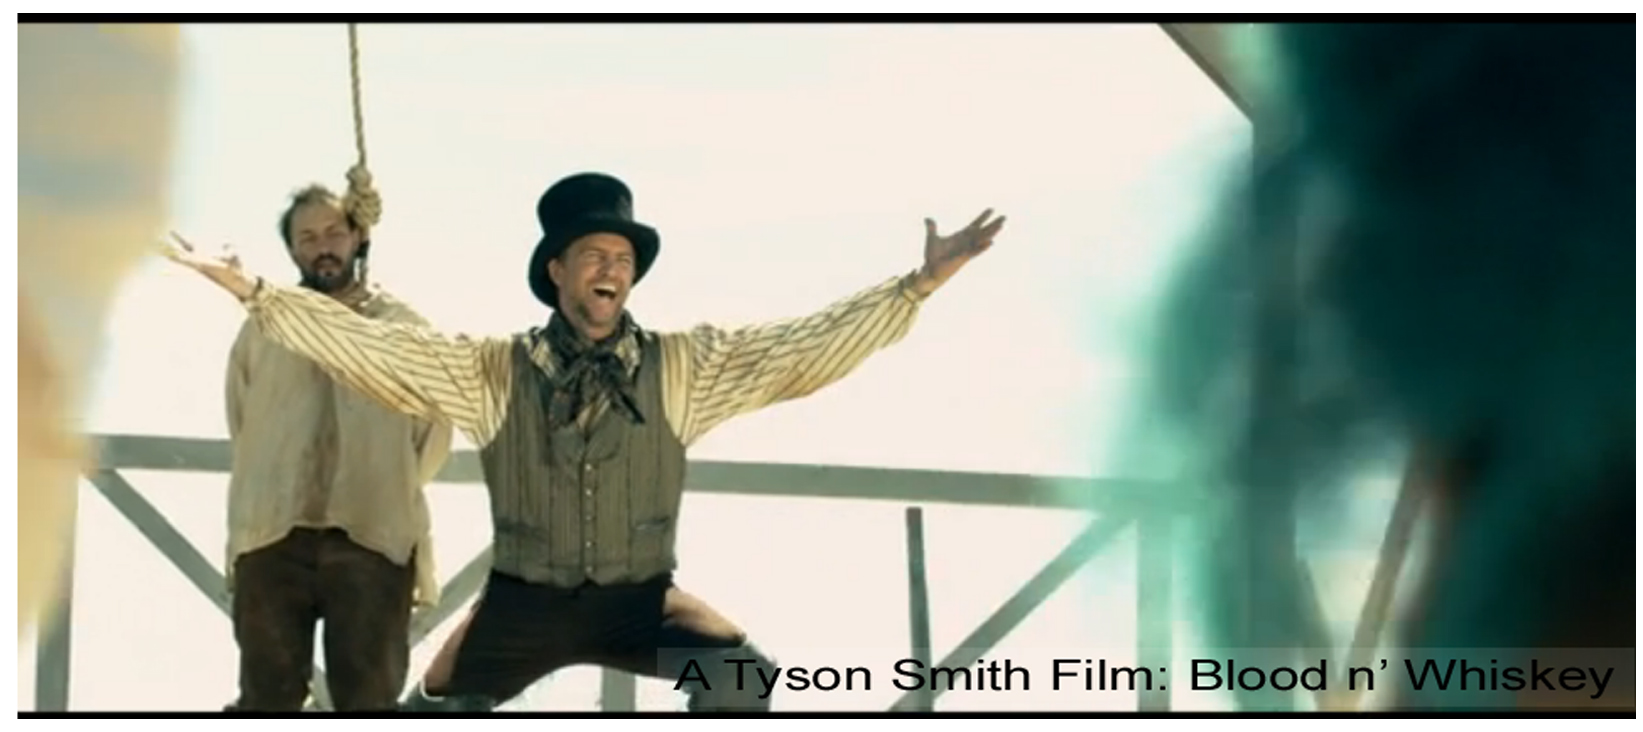 From the Tyson Smith film: Blood n'Whiskey